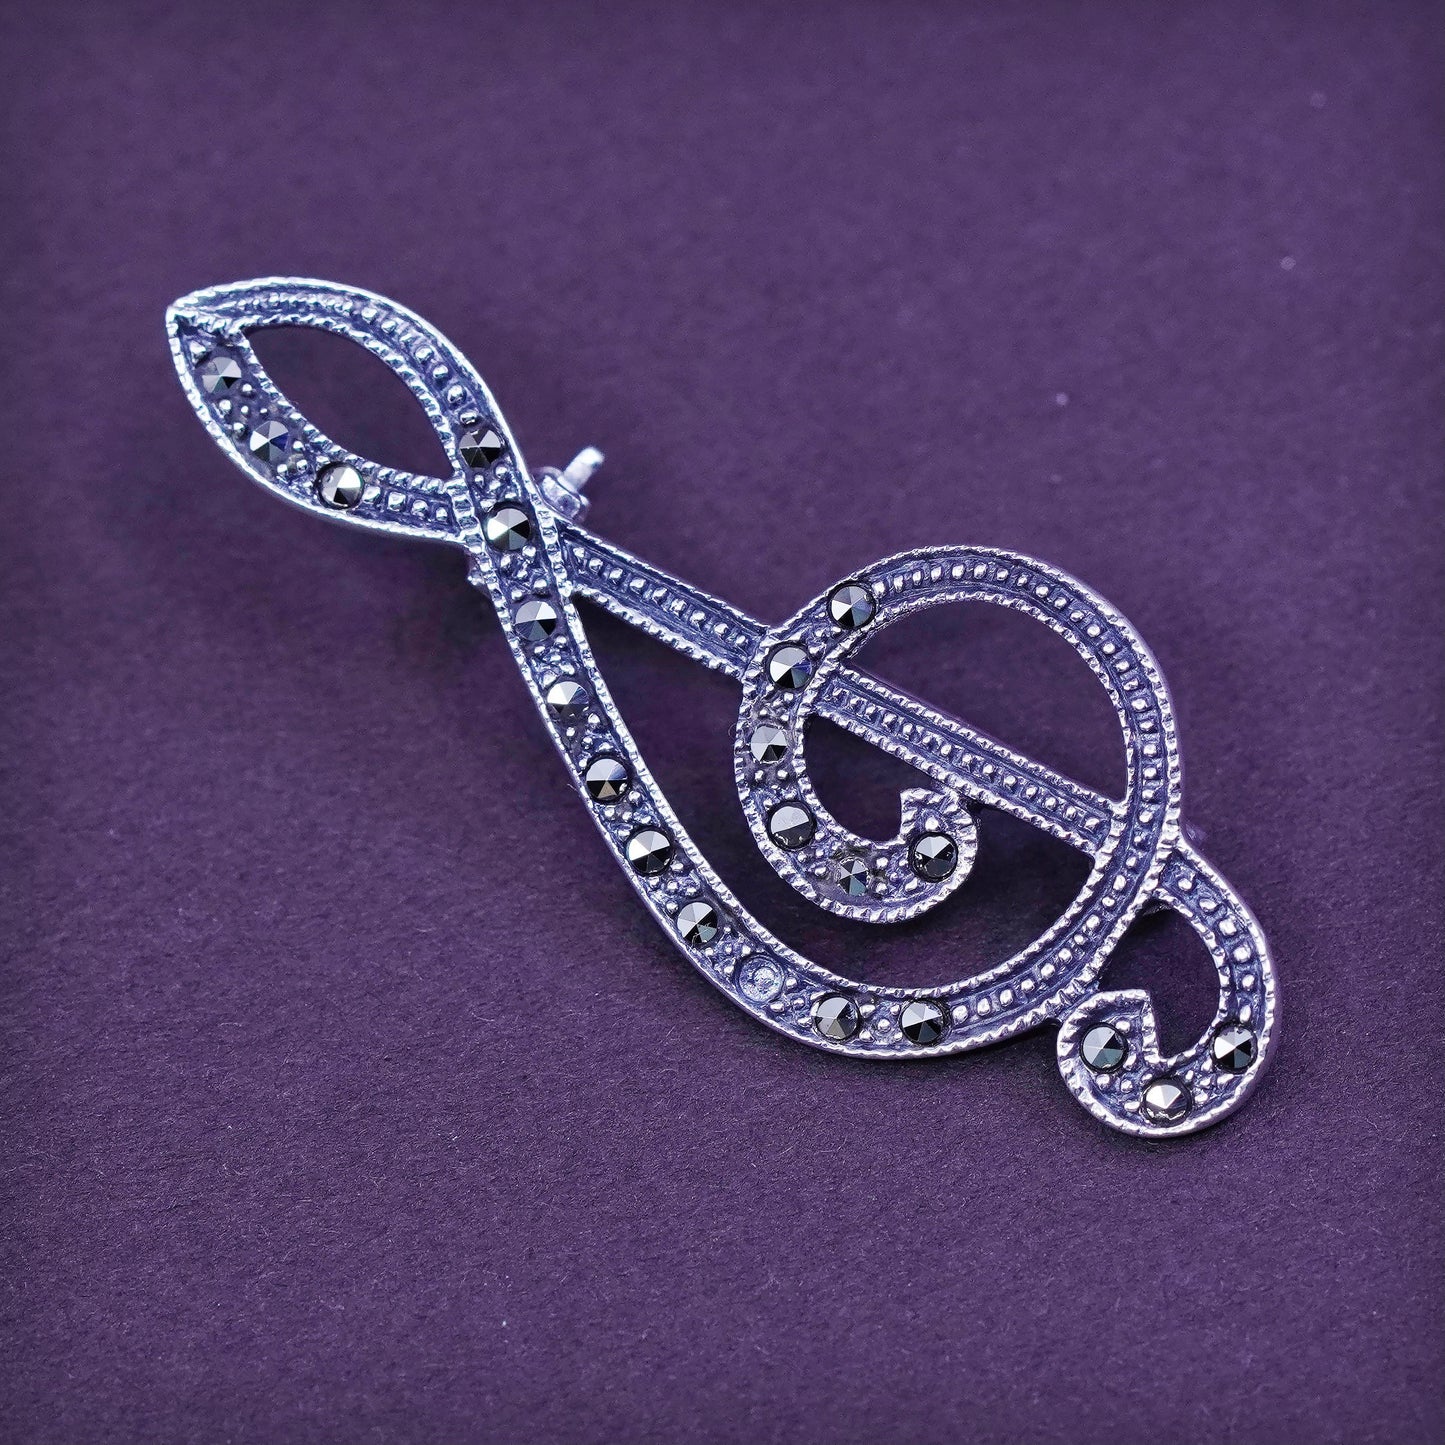 Vintage handmade sterling 925 silver music note symbol brooch with Marcasite